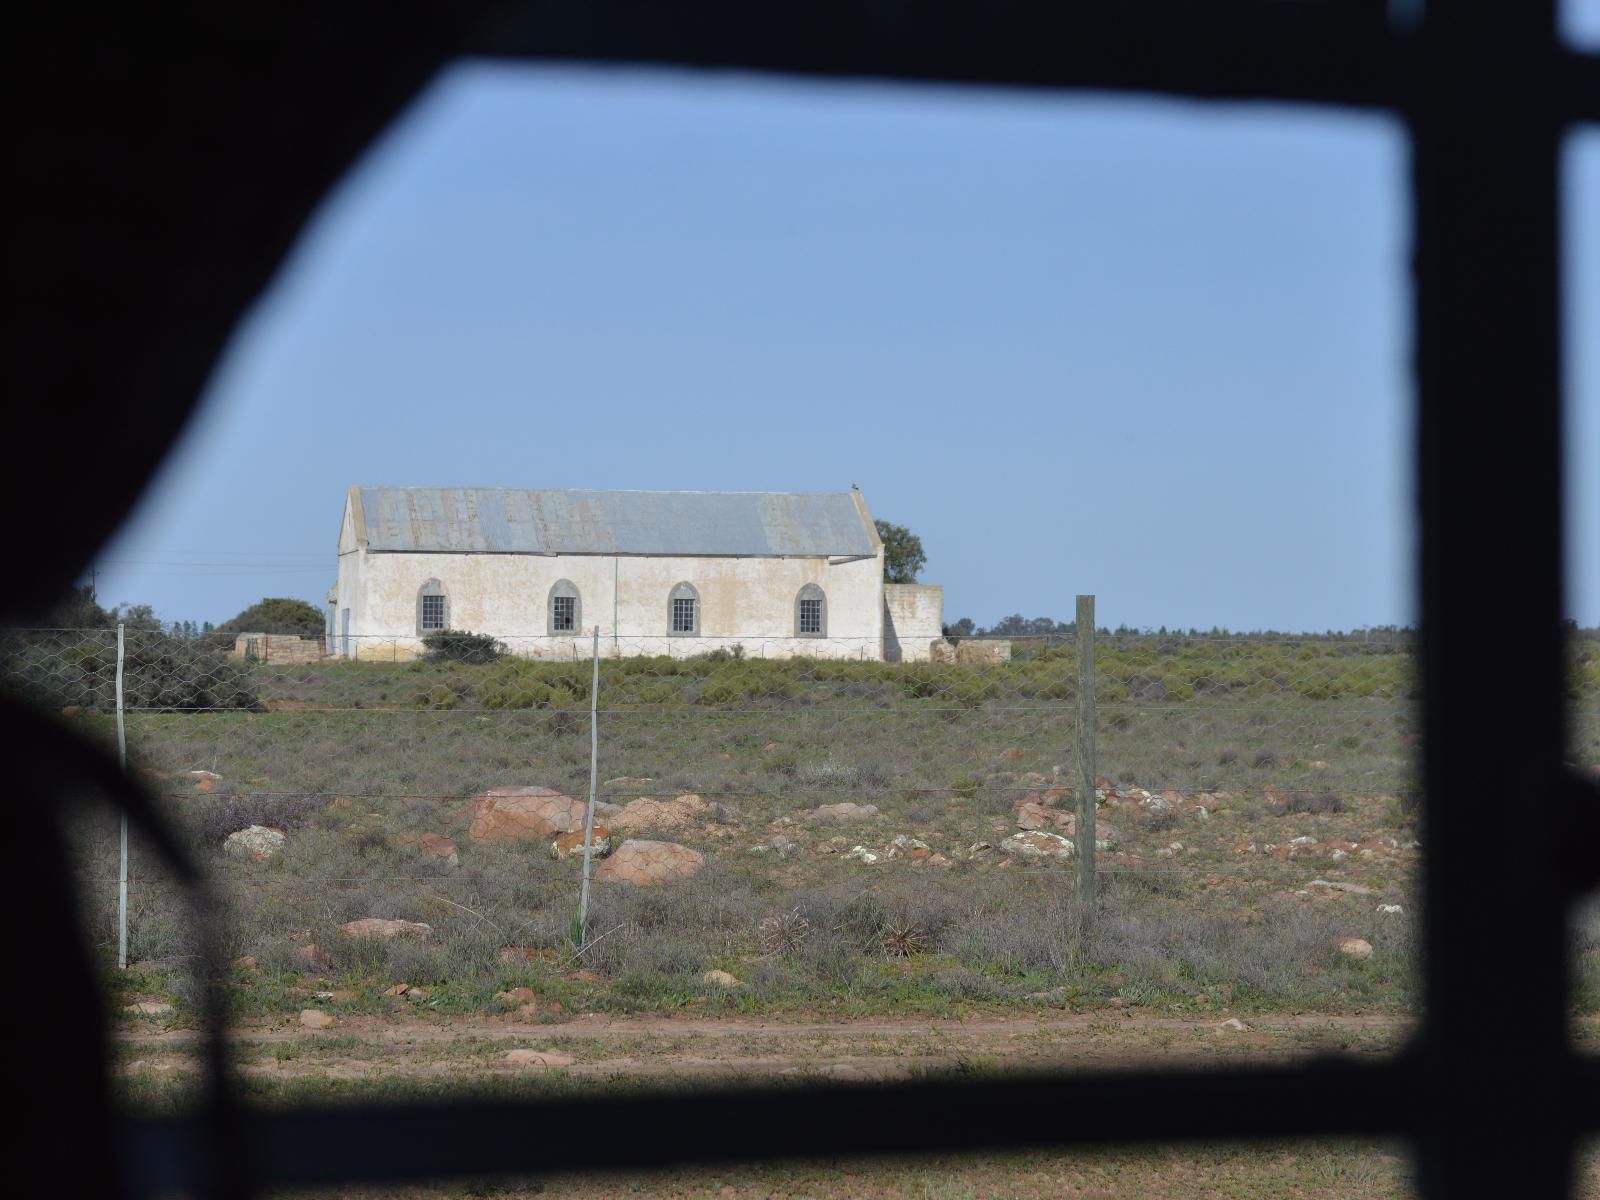 Willemsrivier Trekpad Guest Houses Nieuwoudtville Northern Cape South Africa Building, Architecture, Ruin, Window, Church, Religion